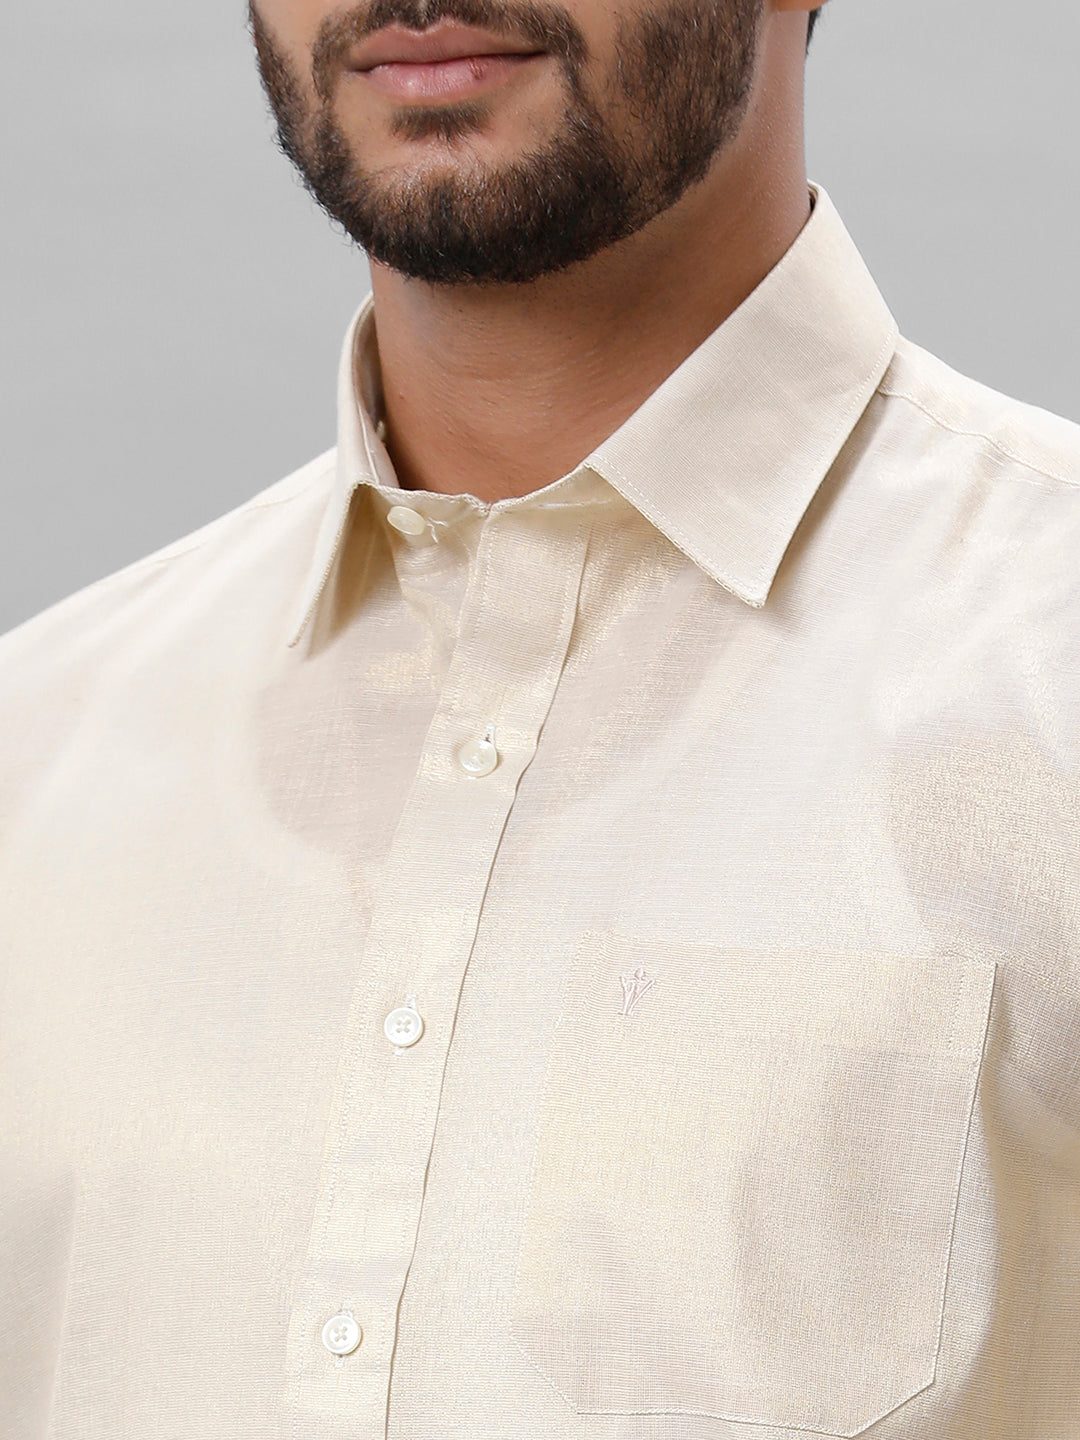 Mens Gold Tissue Full Sleeve Shirt with Matching Readymade Single Dhoti Combo